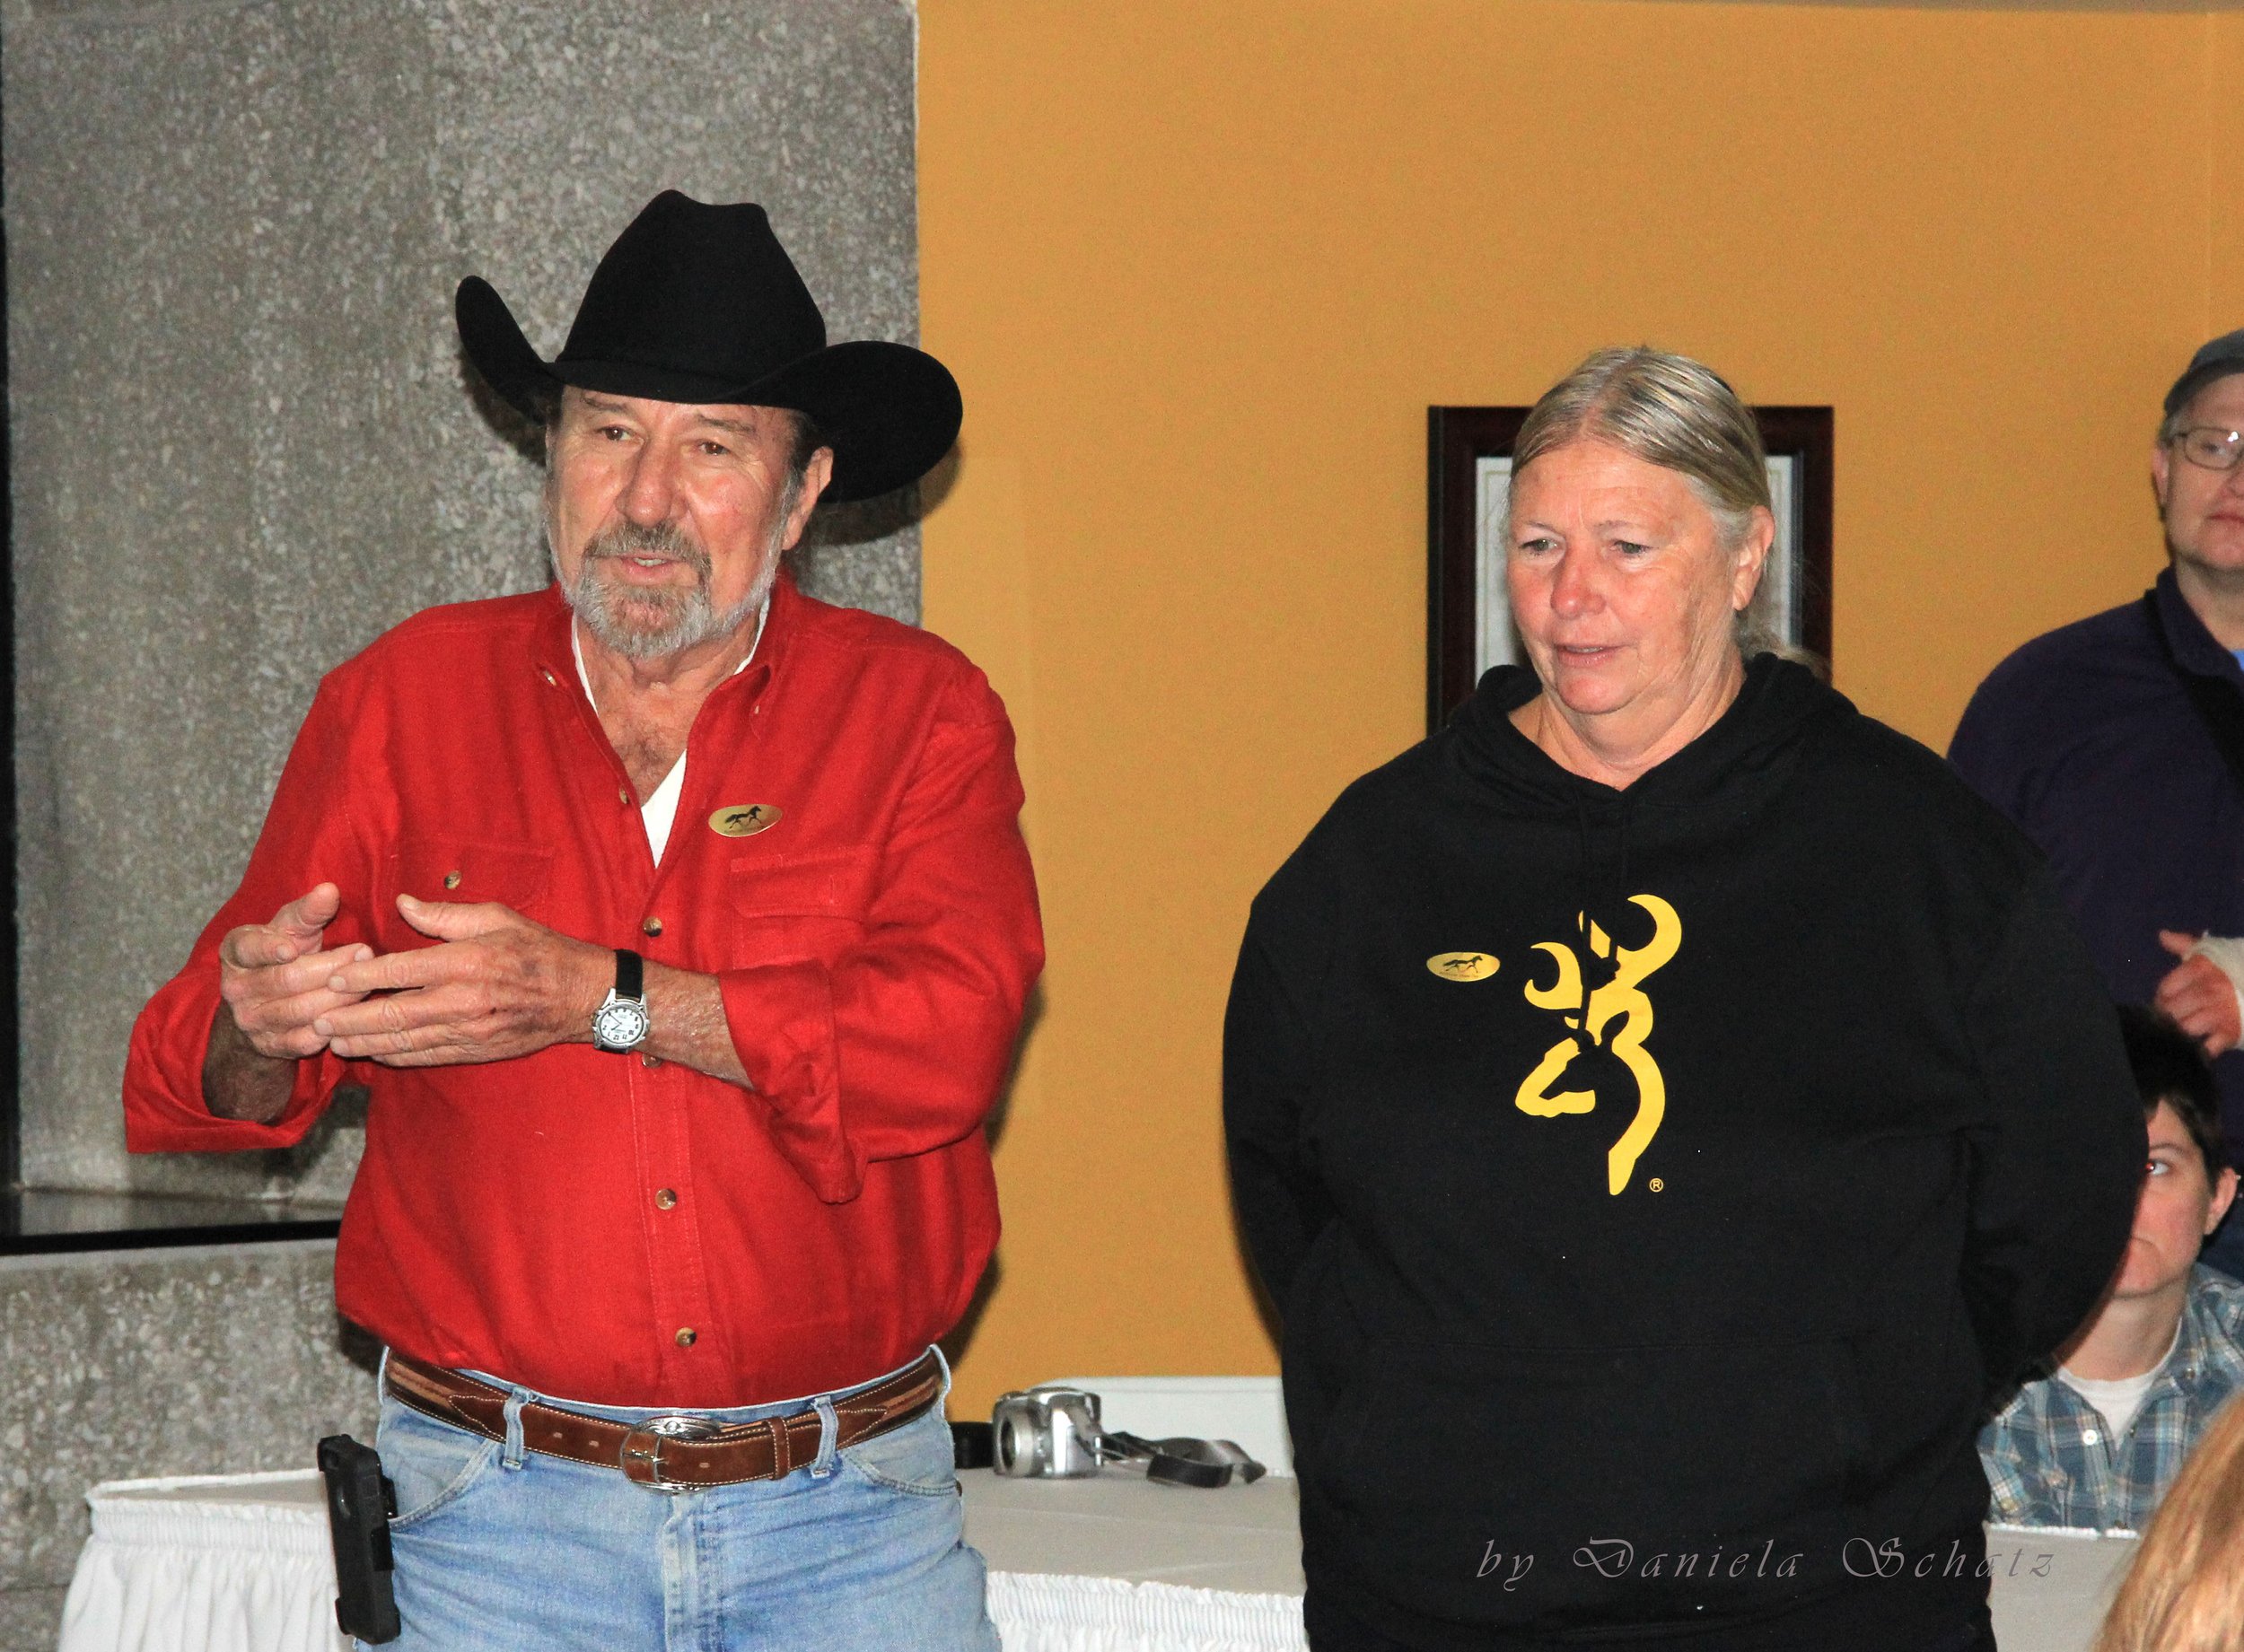 Billy and Kathy Fortner, Hall of Fame presentation BWFA convention 2013 in Kentucky.JPG